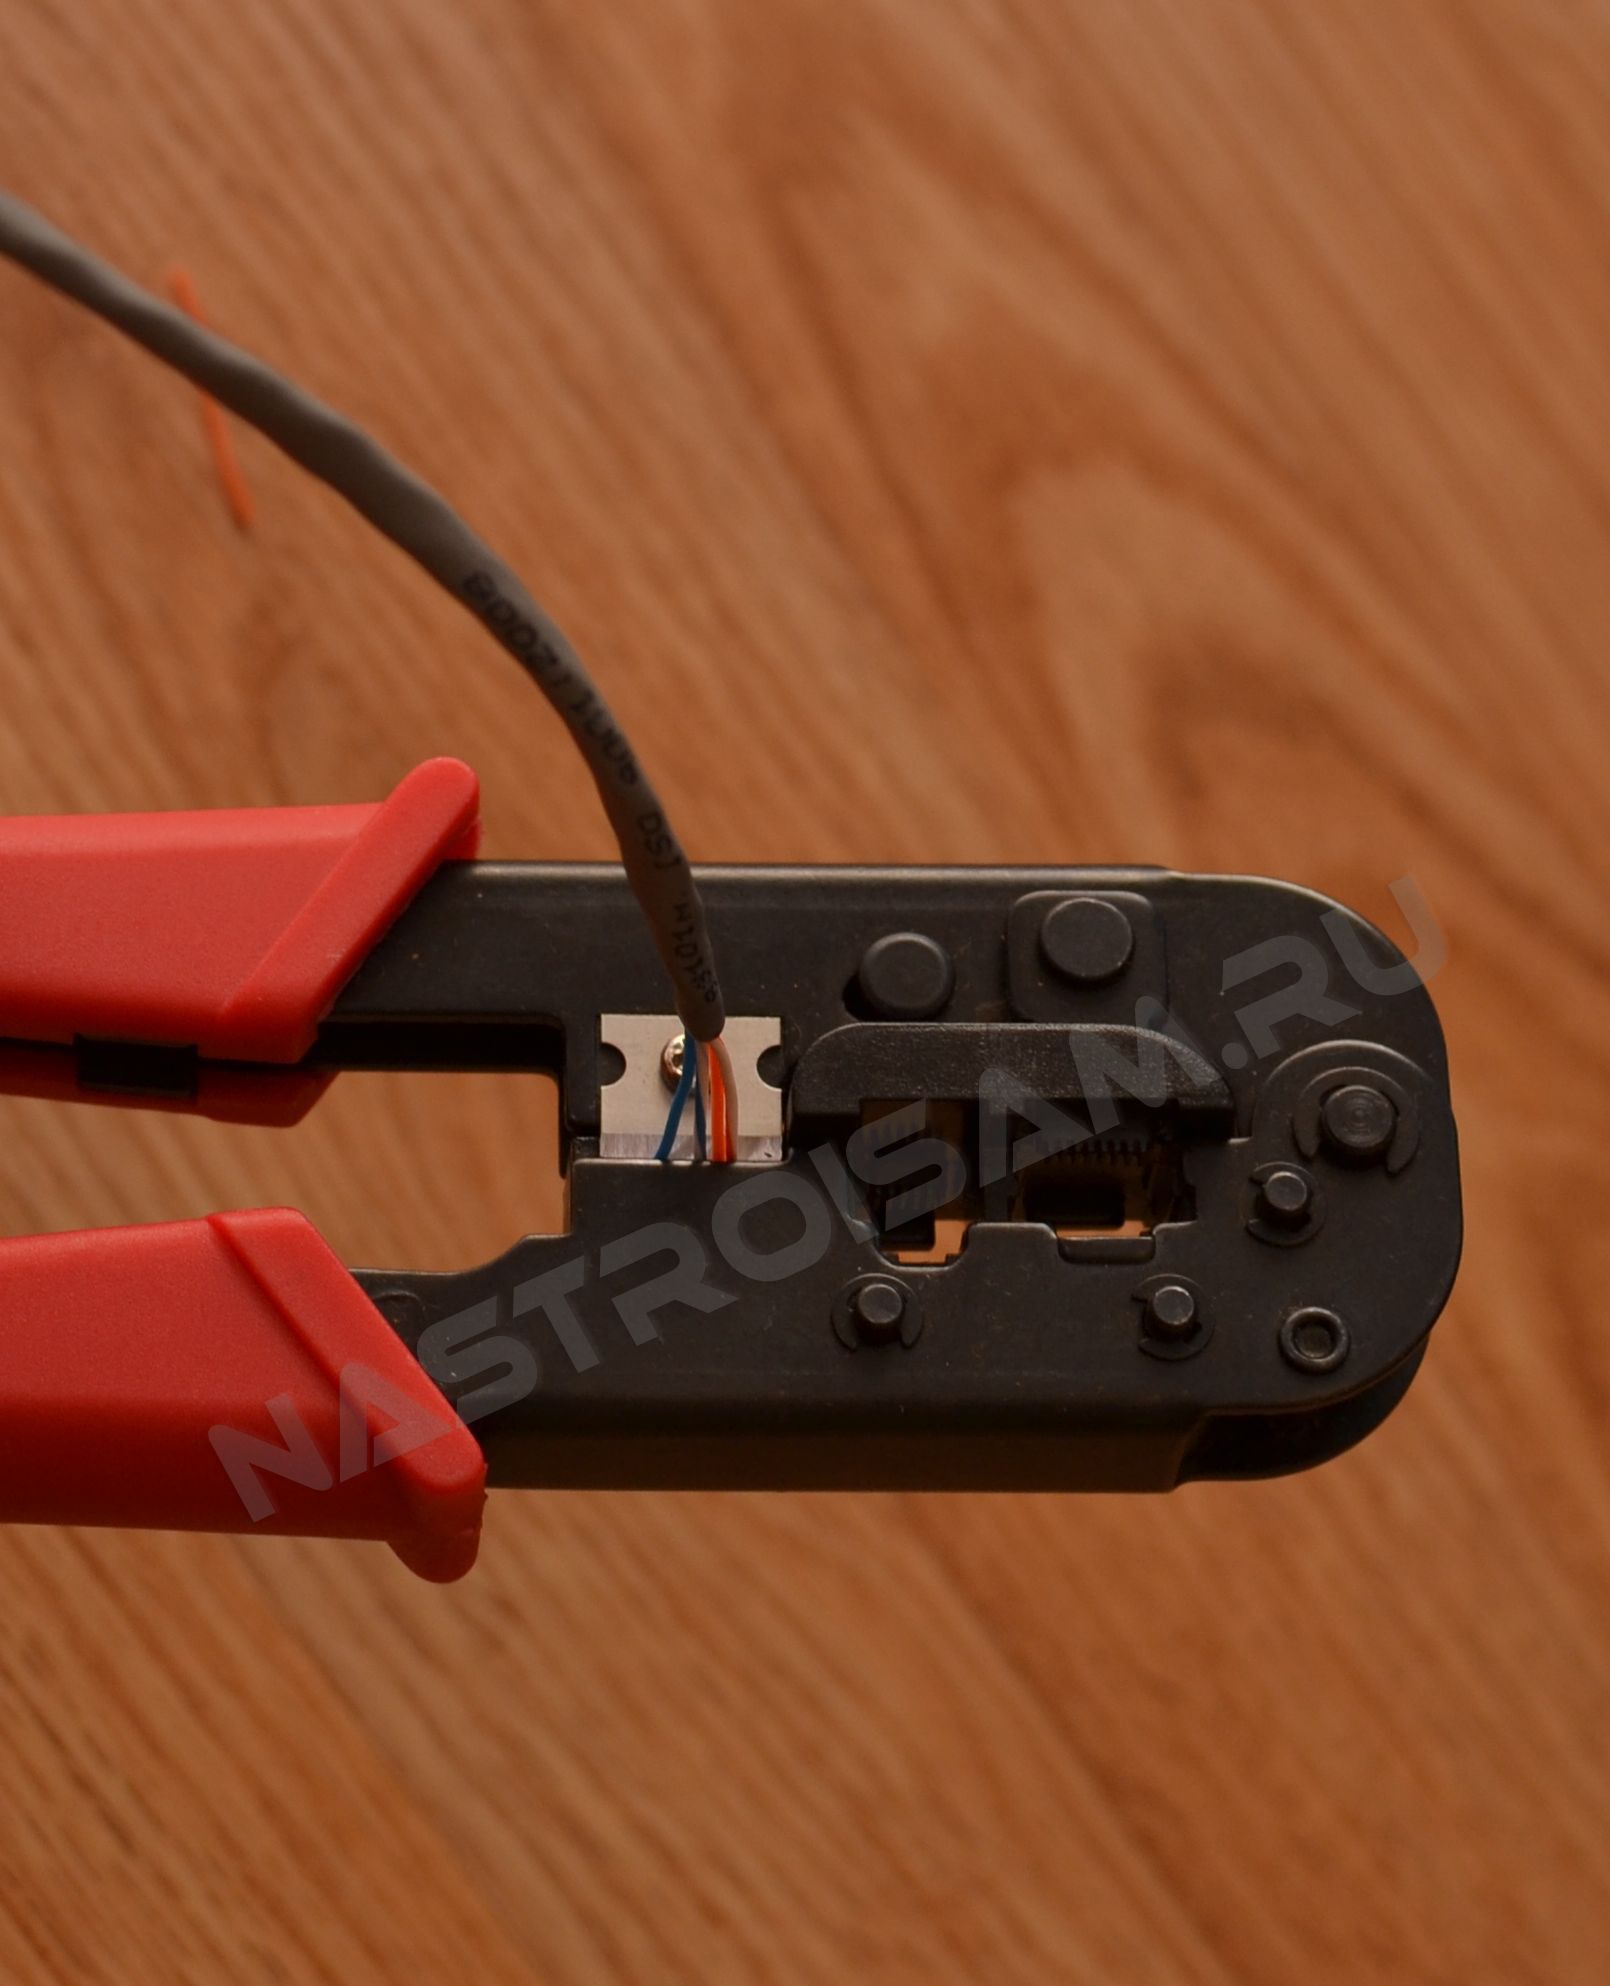 After fitting, trim the excess length of the wires: